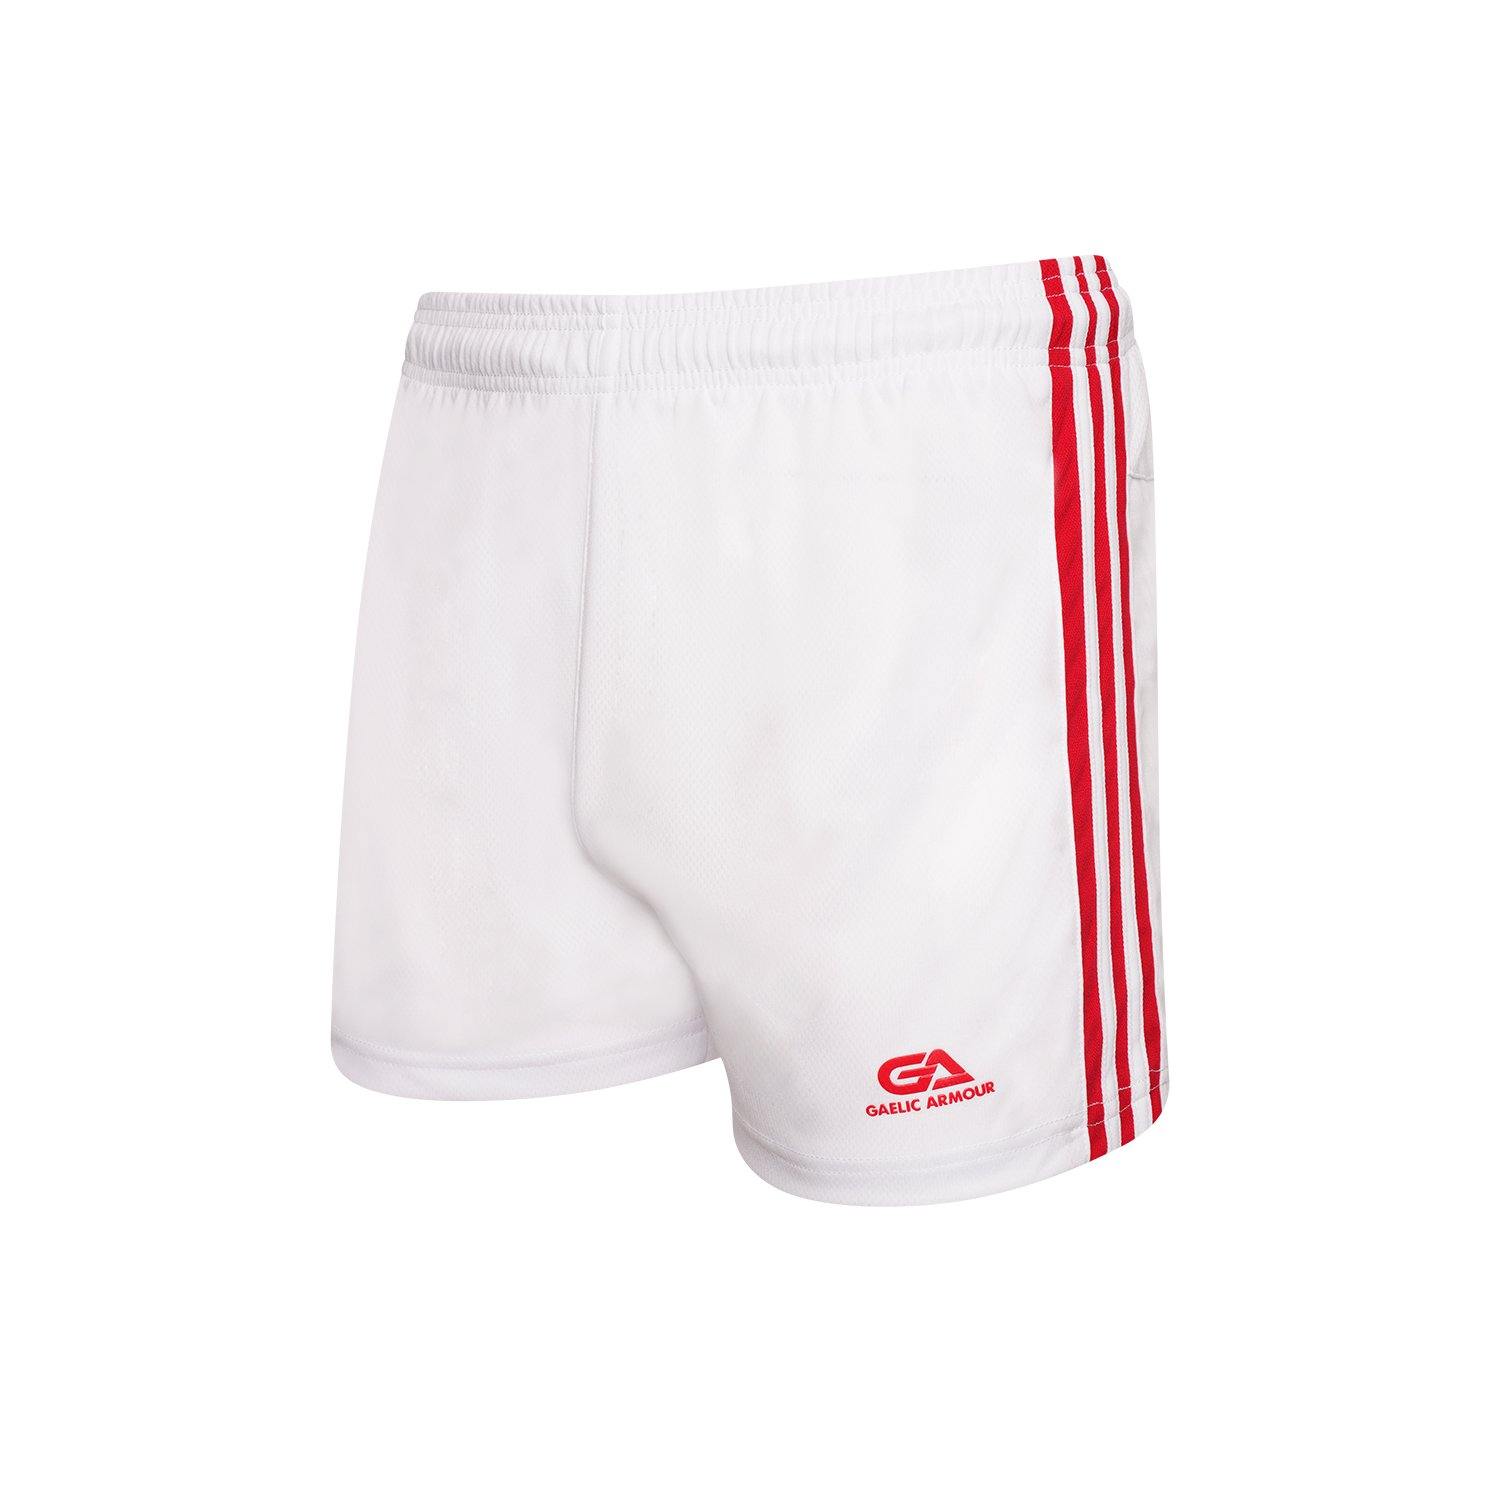 GAA Official Match Shorts White Red - myclubshop.ie